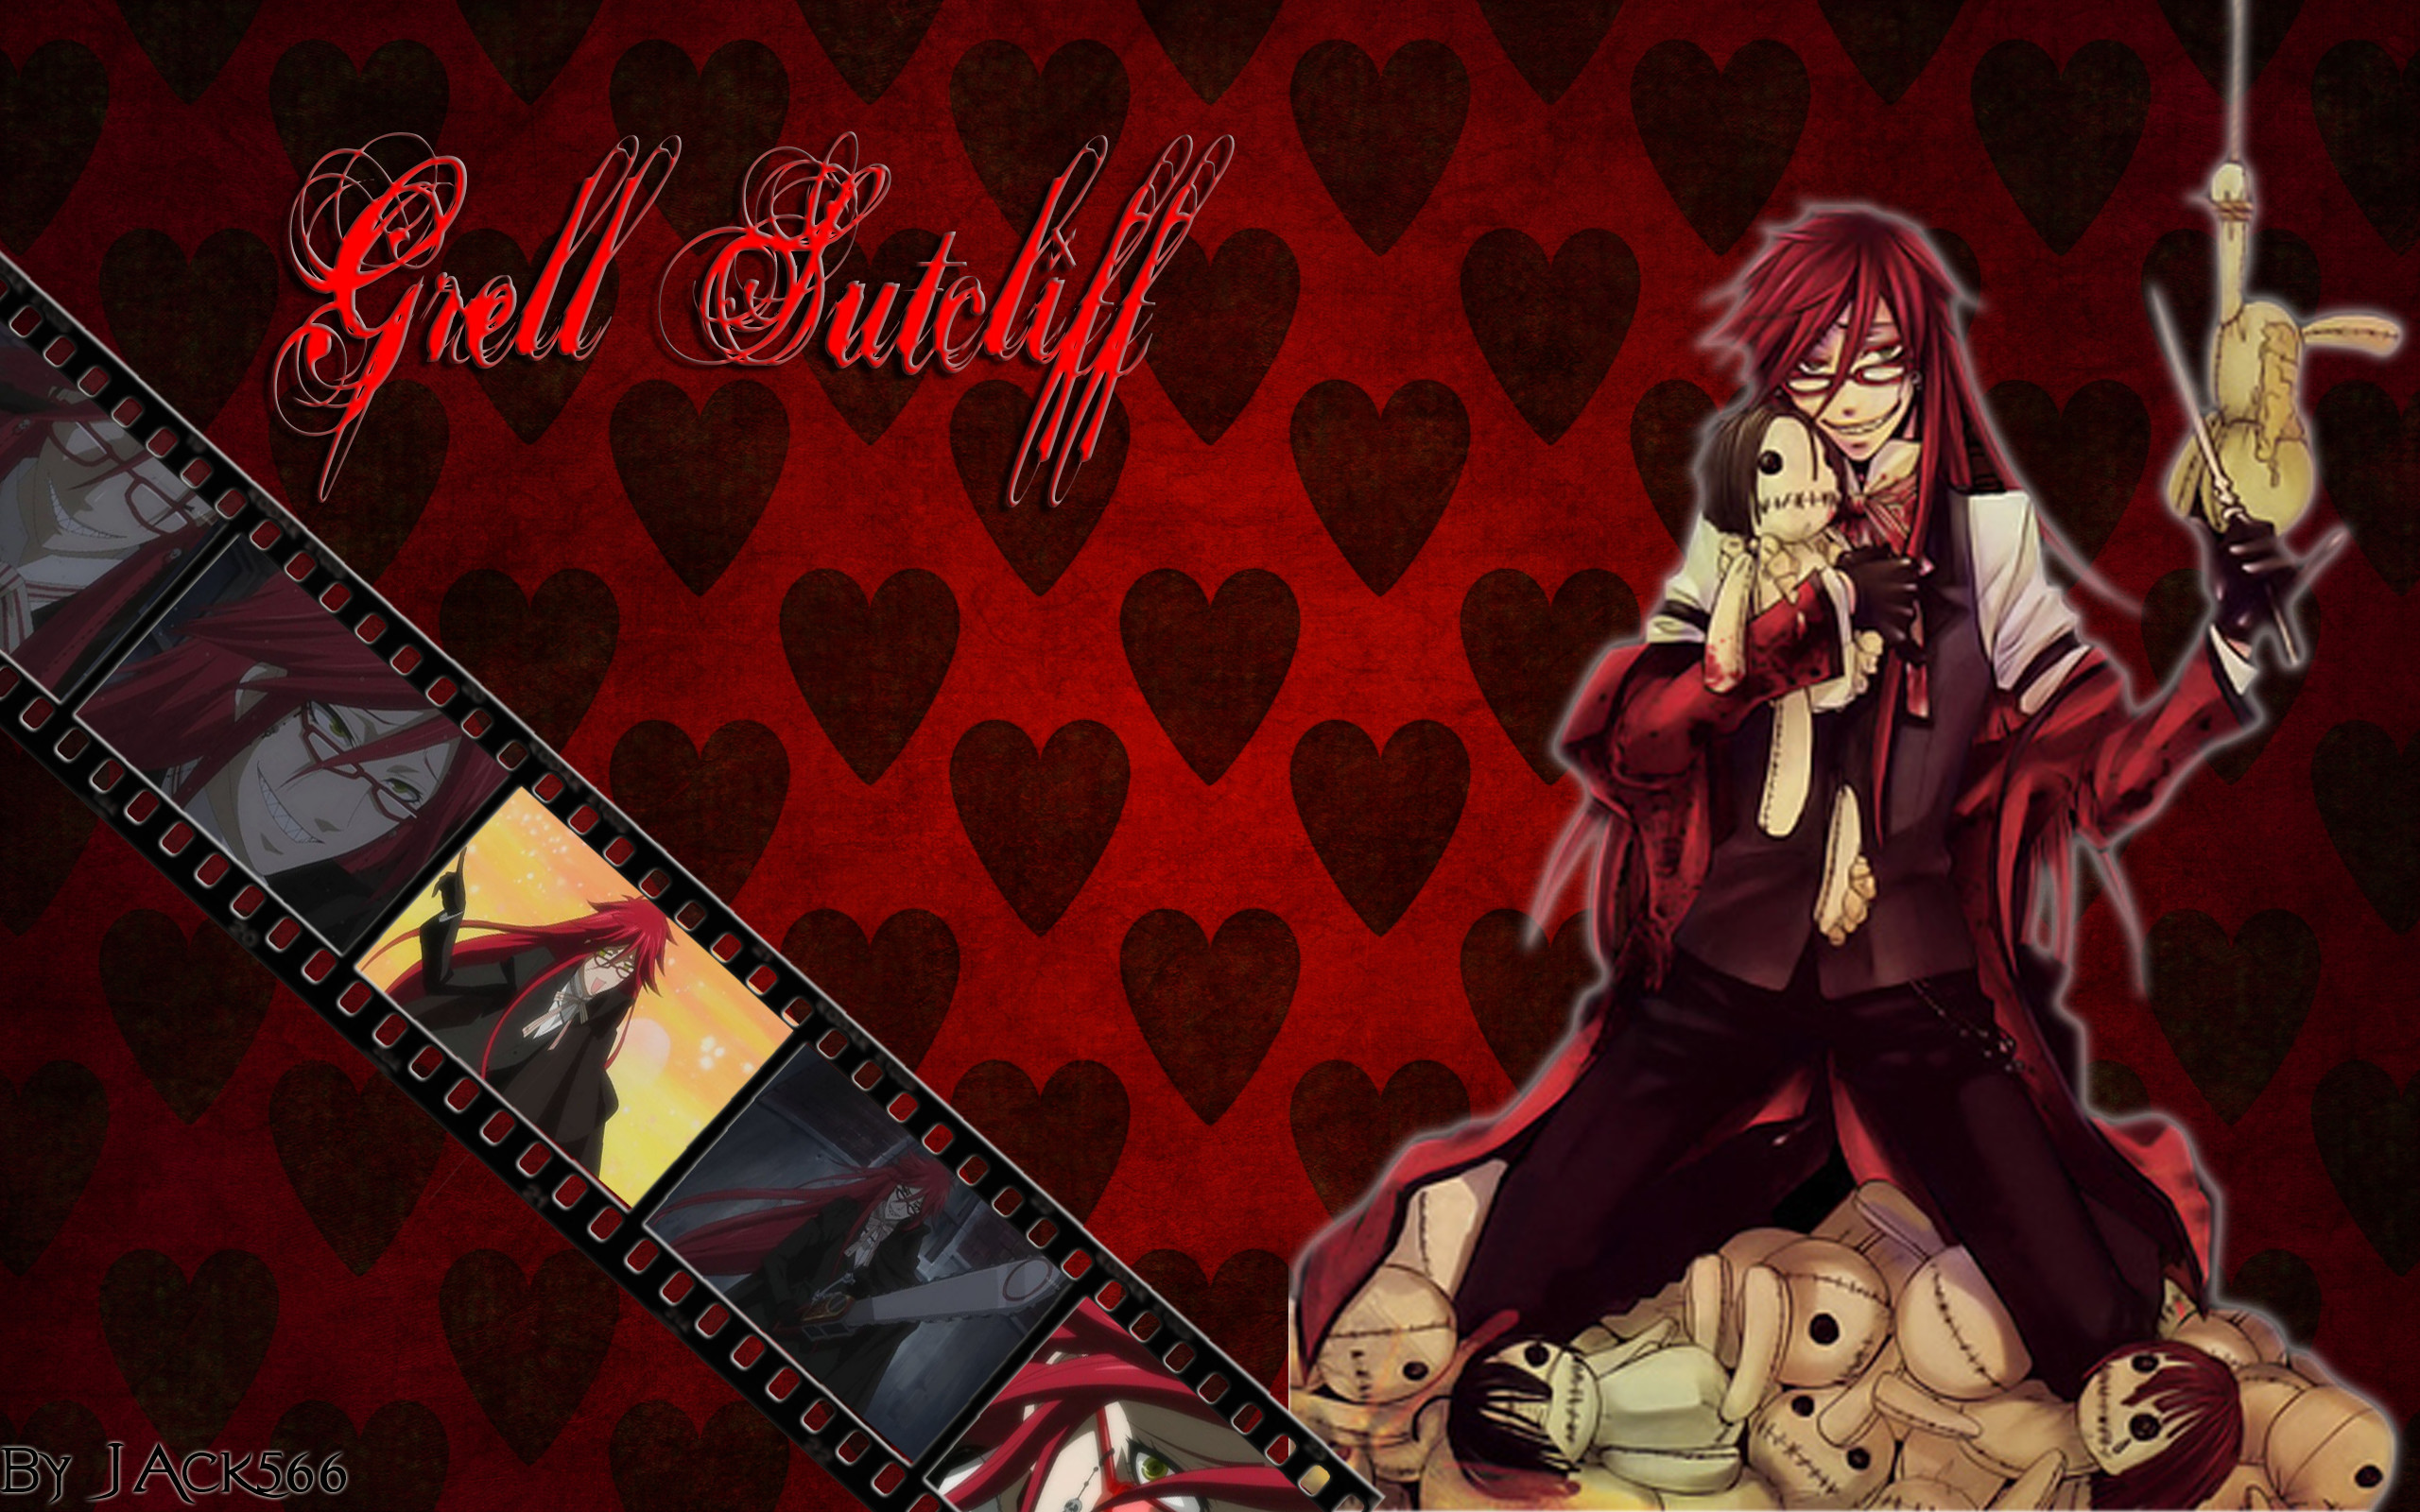 2560x1600 ... Grell Sutcliff : Wallpaper 1 by Jack566